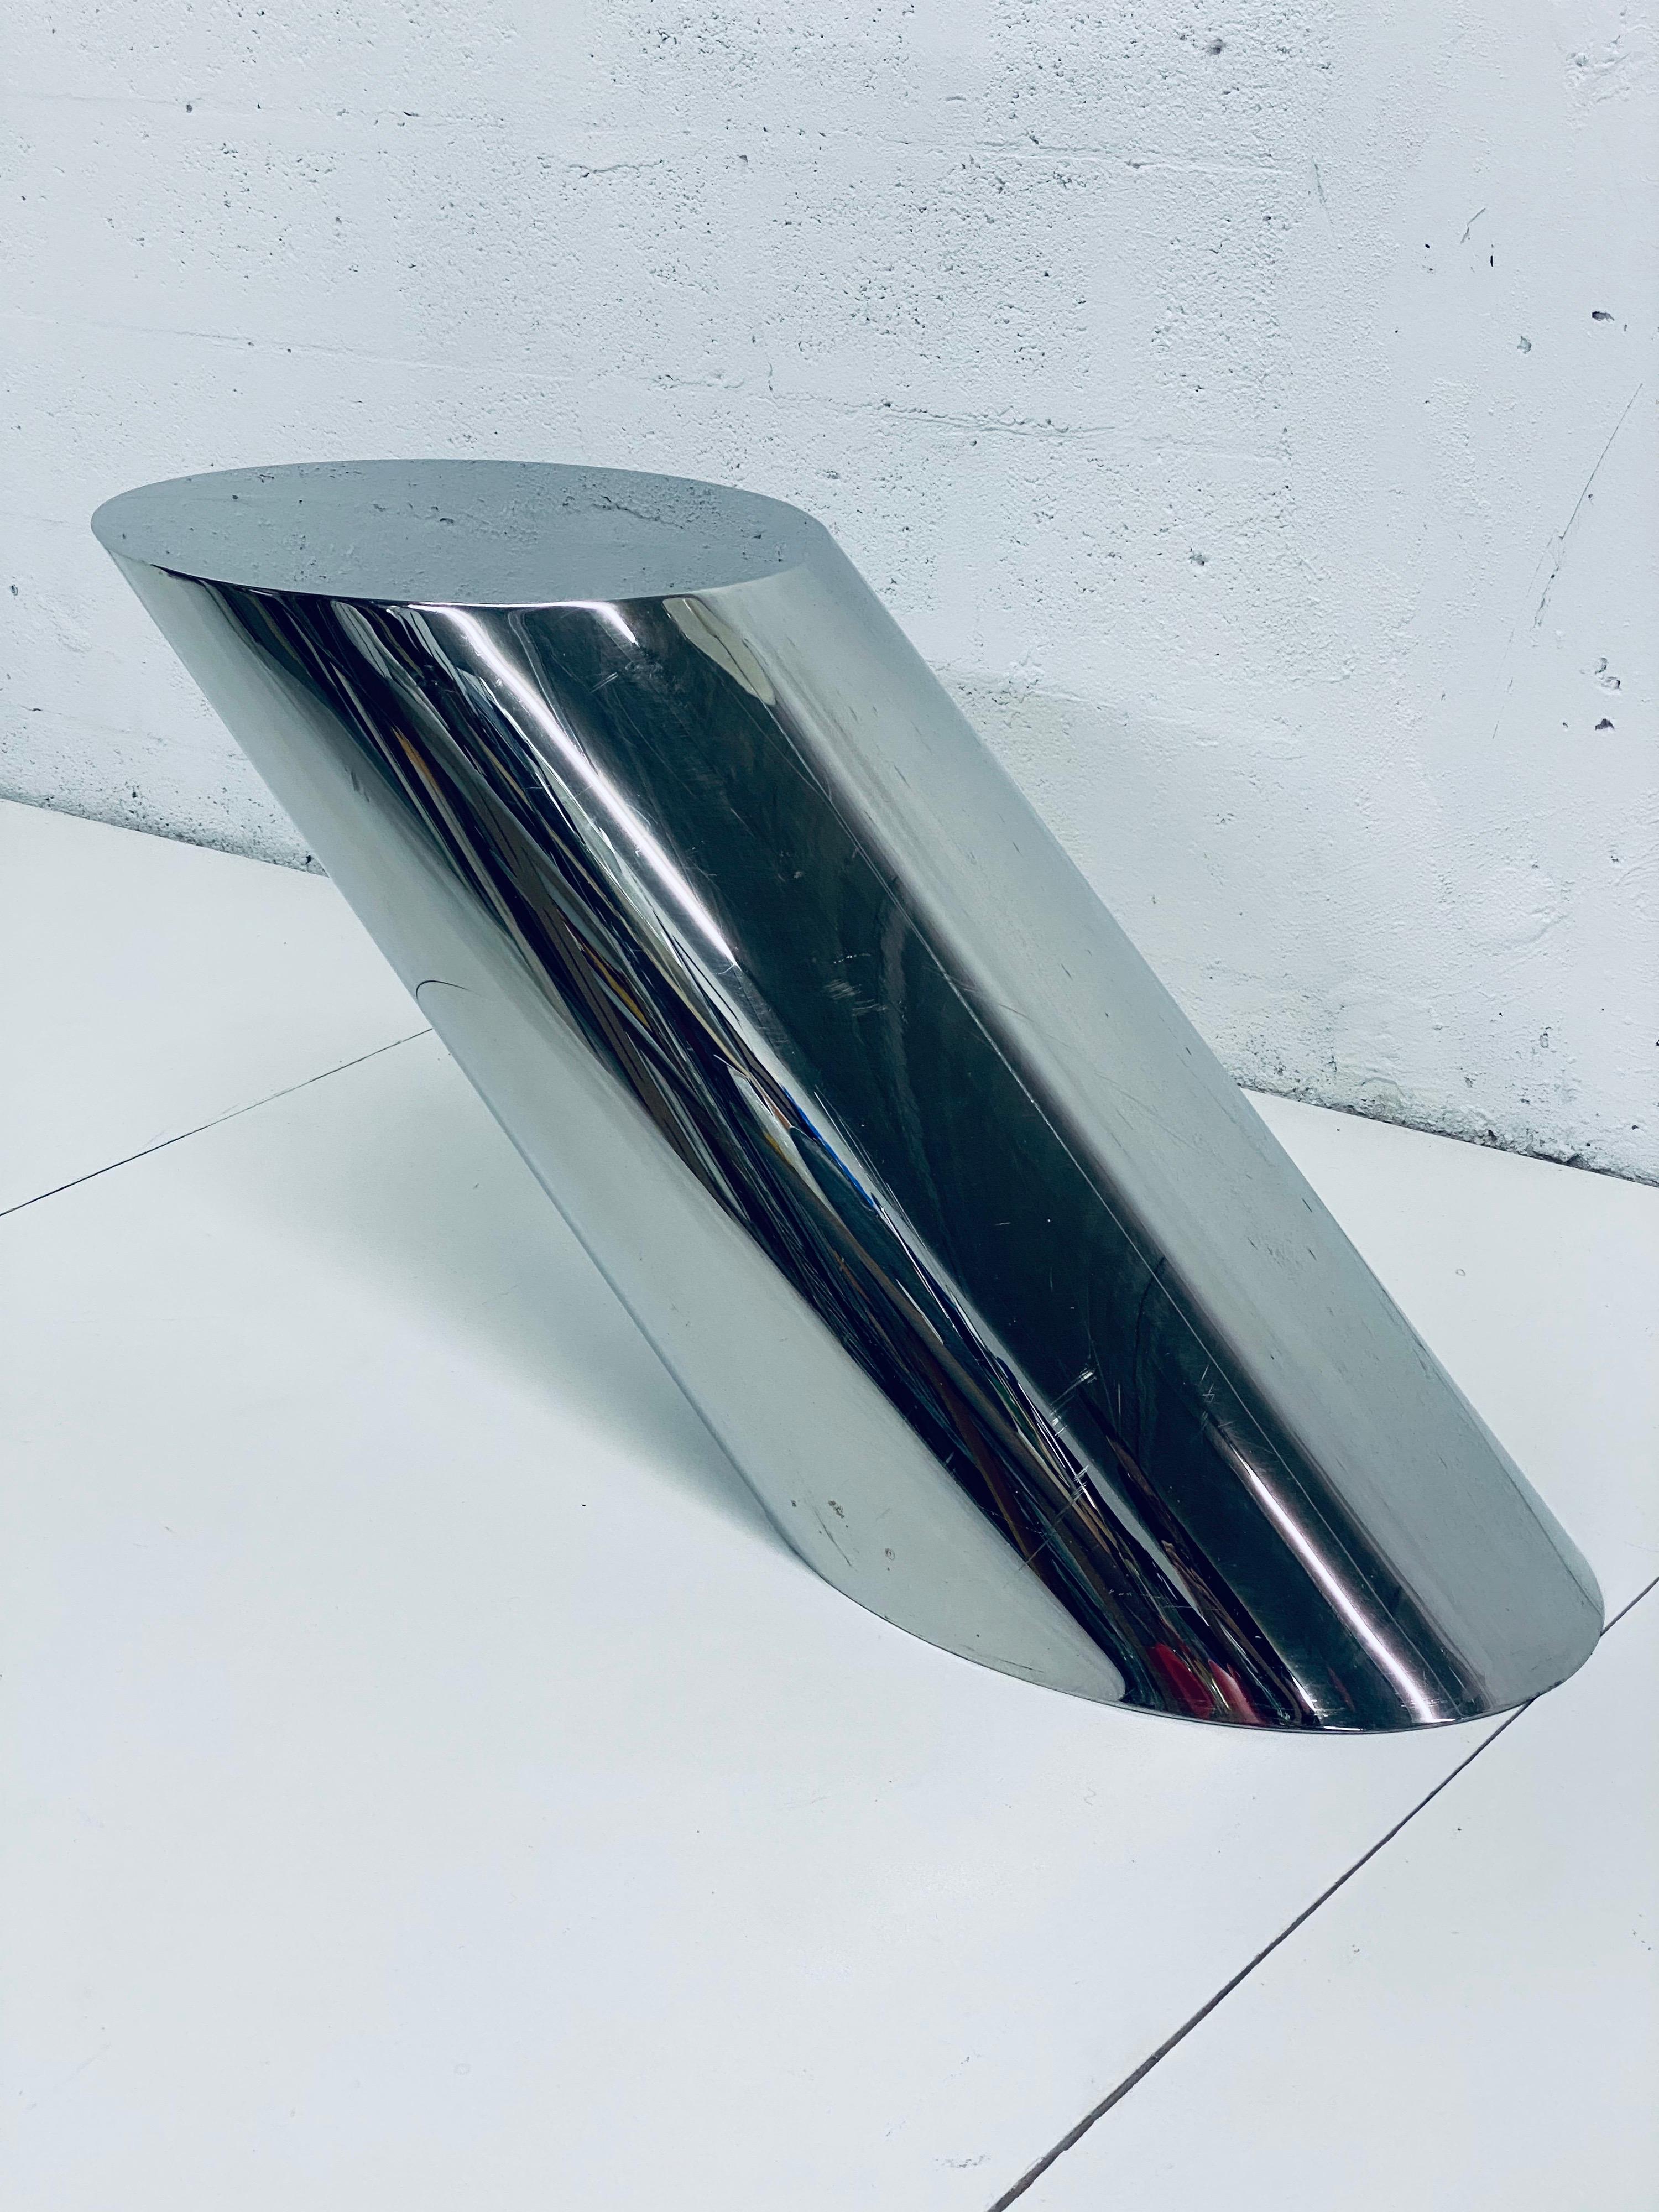 Original condition polished steel cantilever table designed by J Wade Beam and manufactured by Brueton circa 1970s. The base is weighted and is angled at 45 degrees. Use as side, end or drinks table.